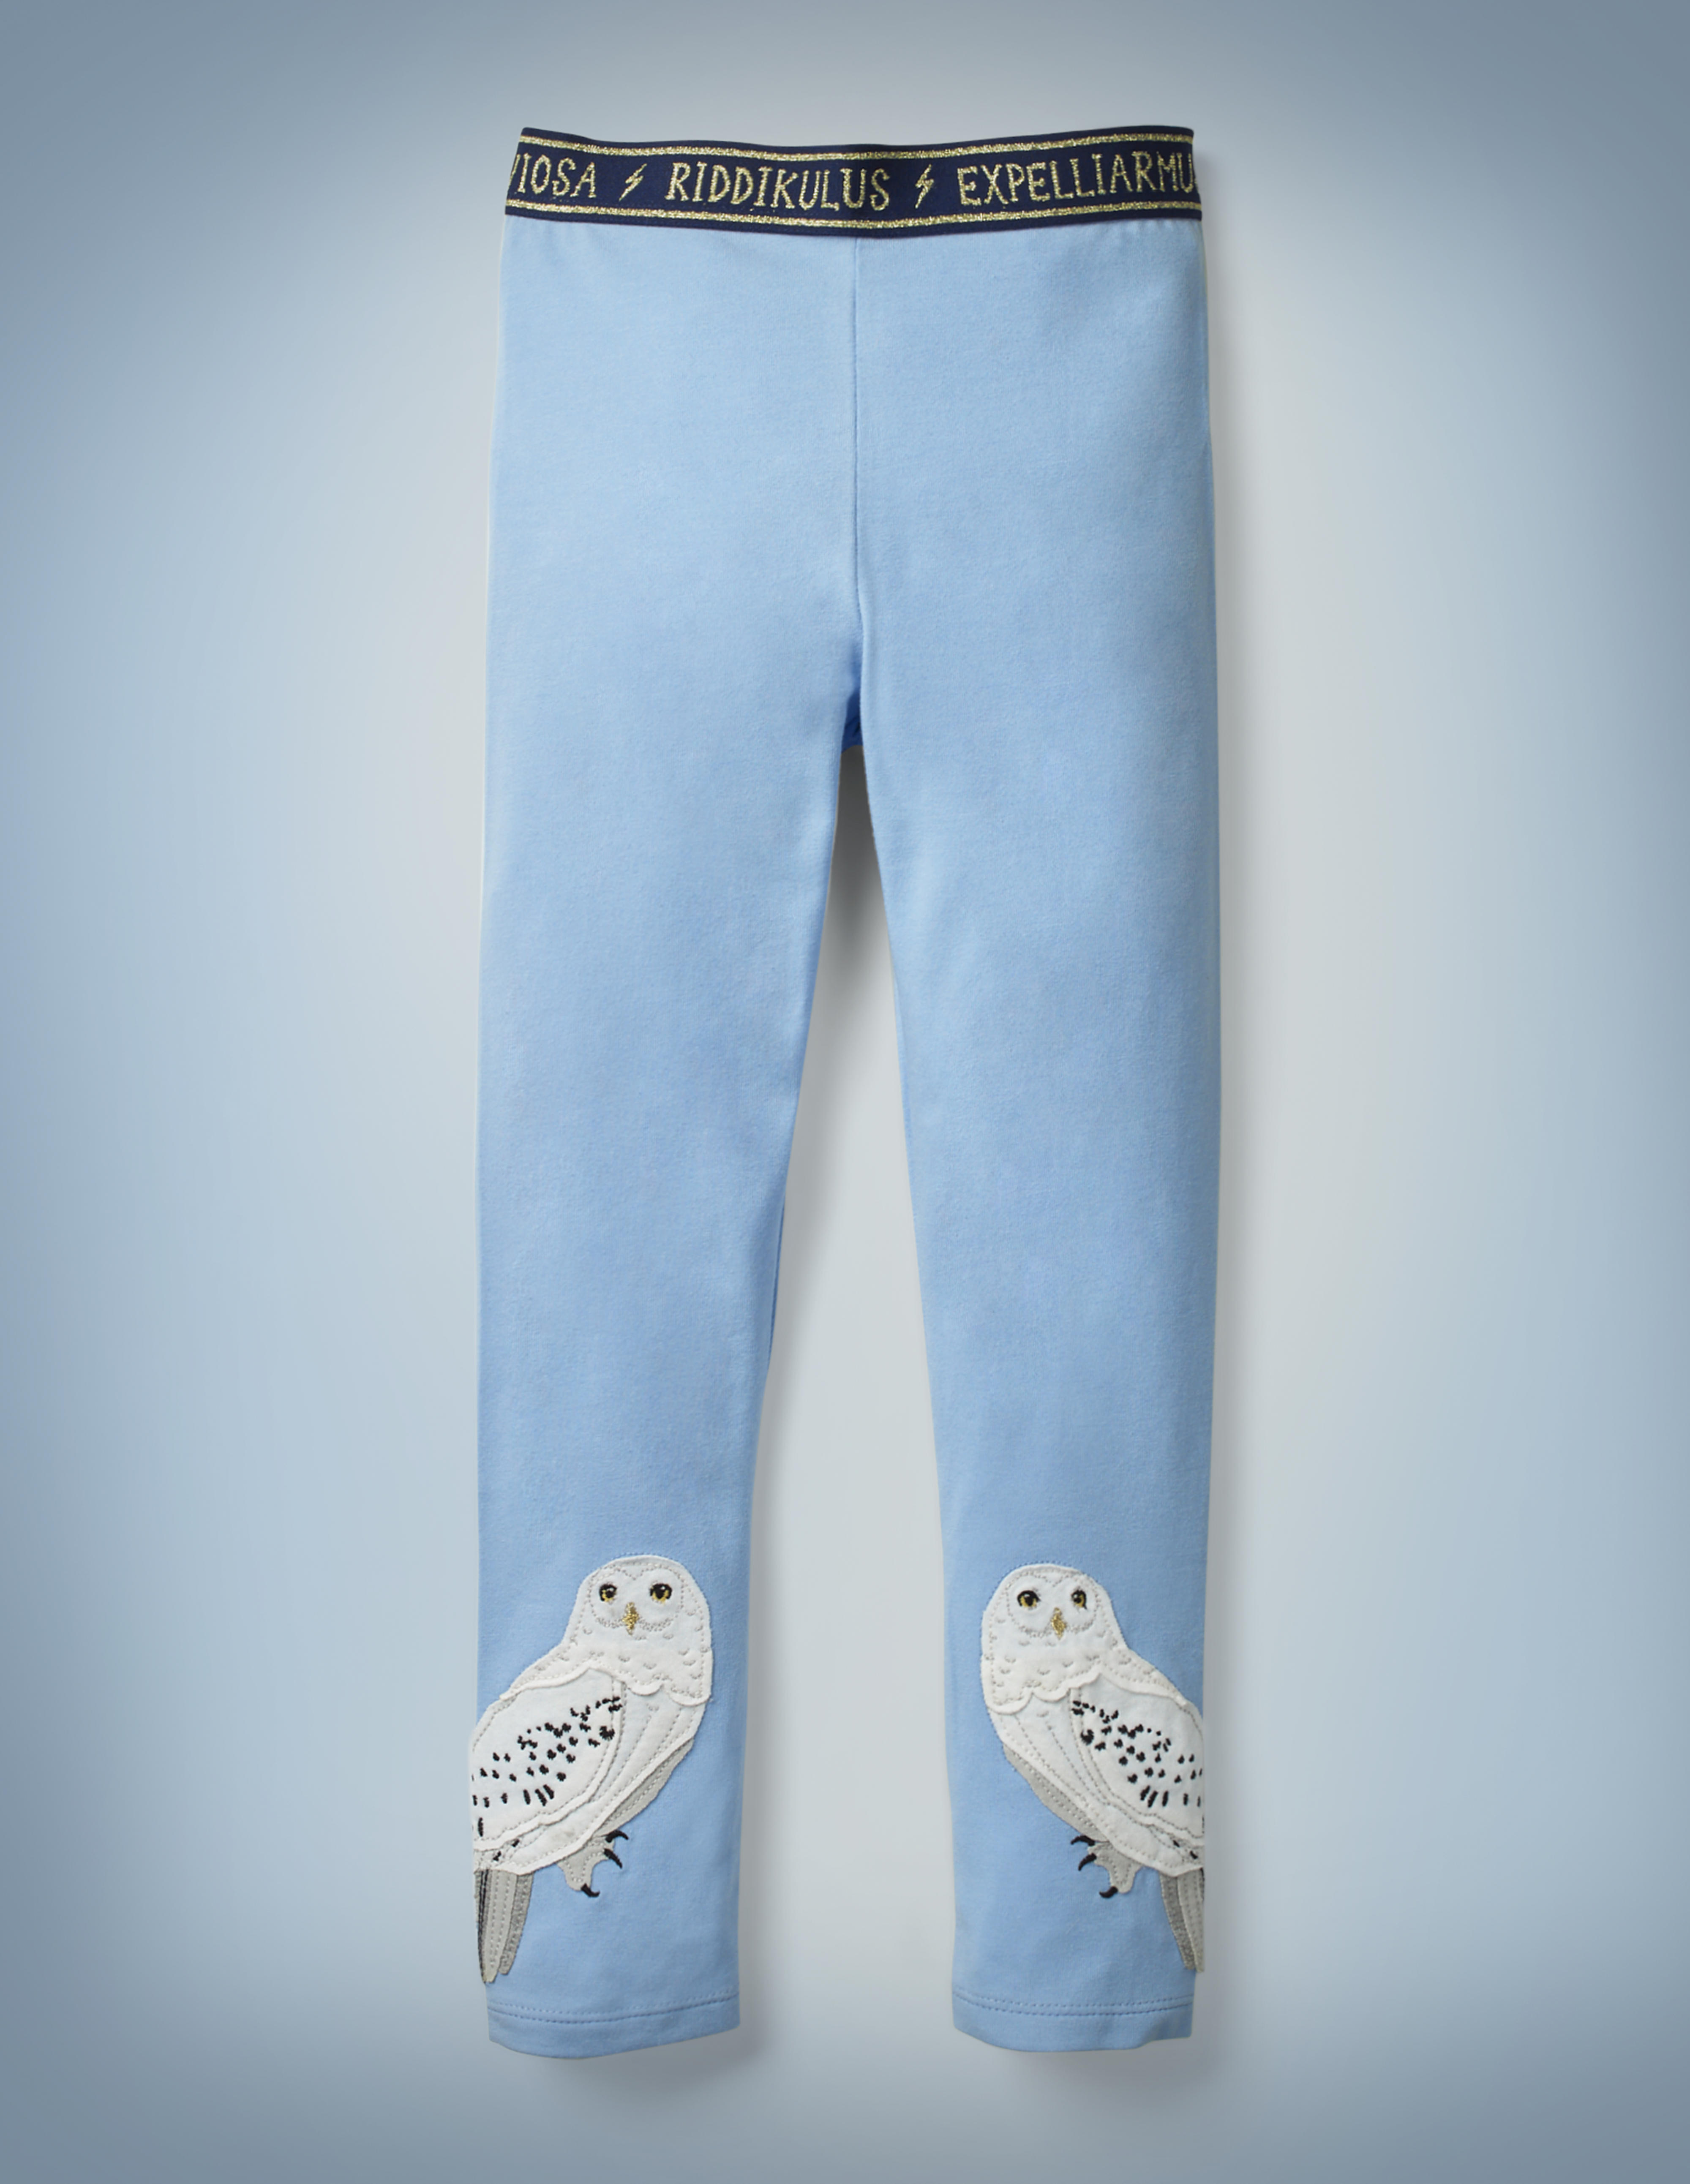 The Mini Boden Hedwig Appliqué Leggings in light blue feature appliqué designs of Hedwig near both cuffs and a navy waistband that features spell incantations such as “Riddikulus” and “Expelliarmus” in gold, separated by lightning bolts. They retail for £18.